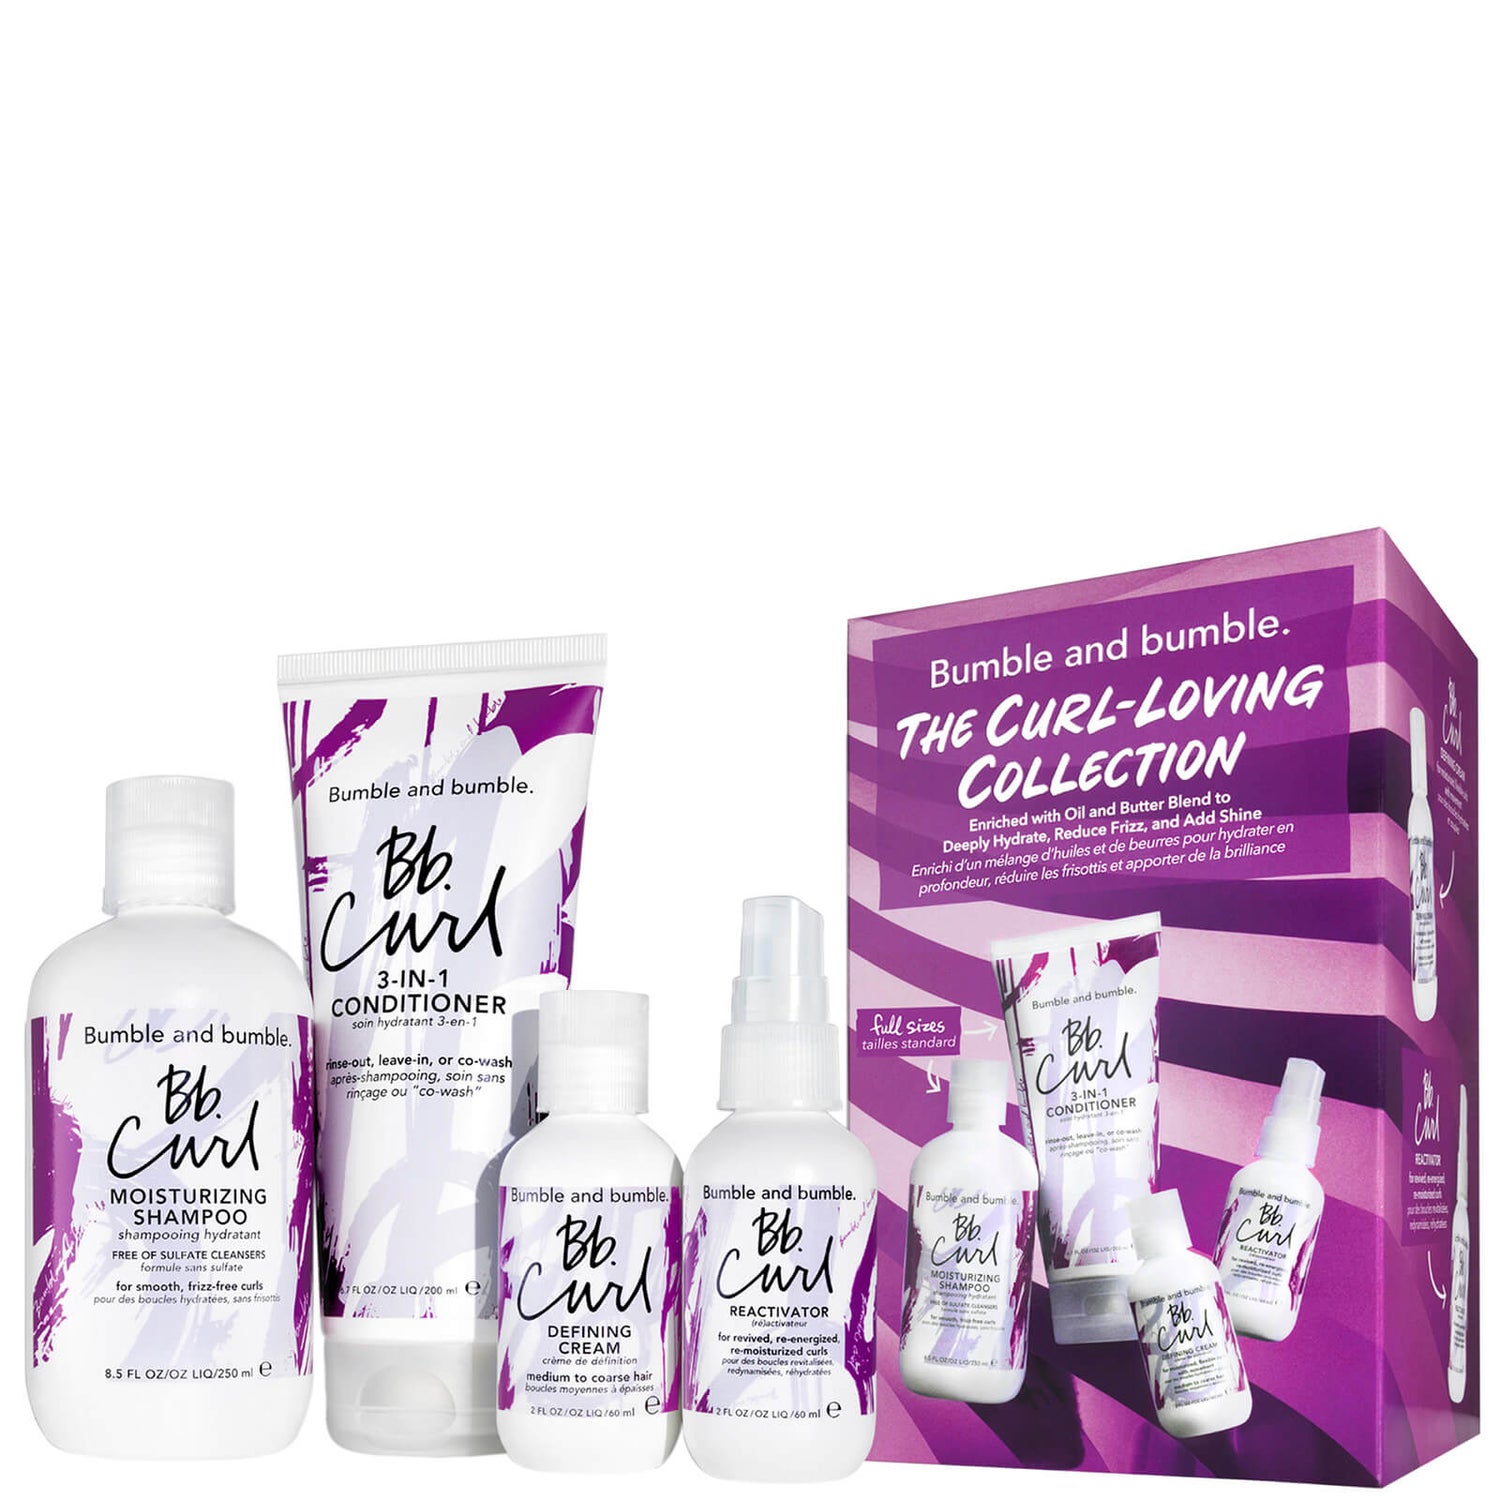 The Curl-Loving Set Bumble and bumble